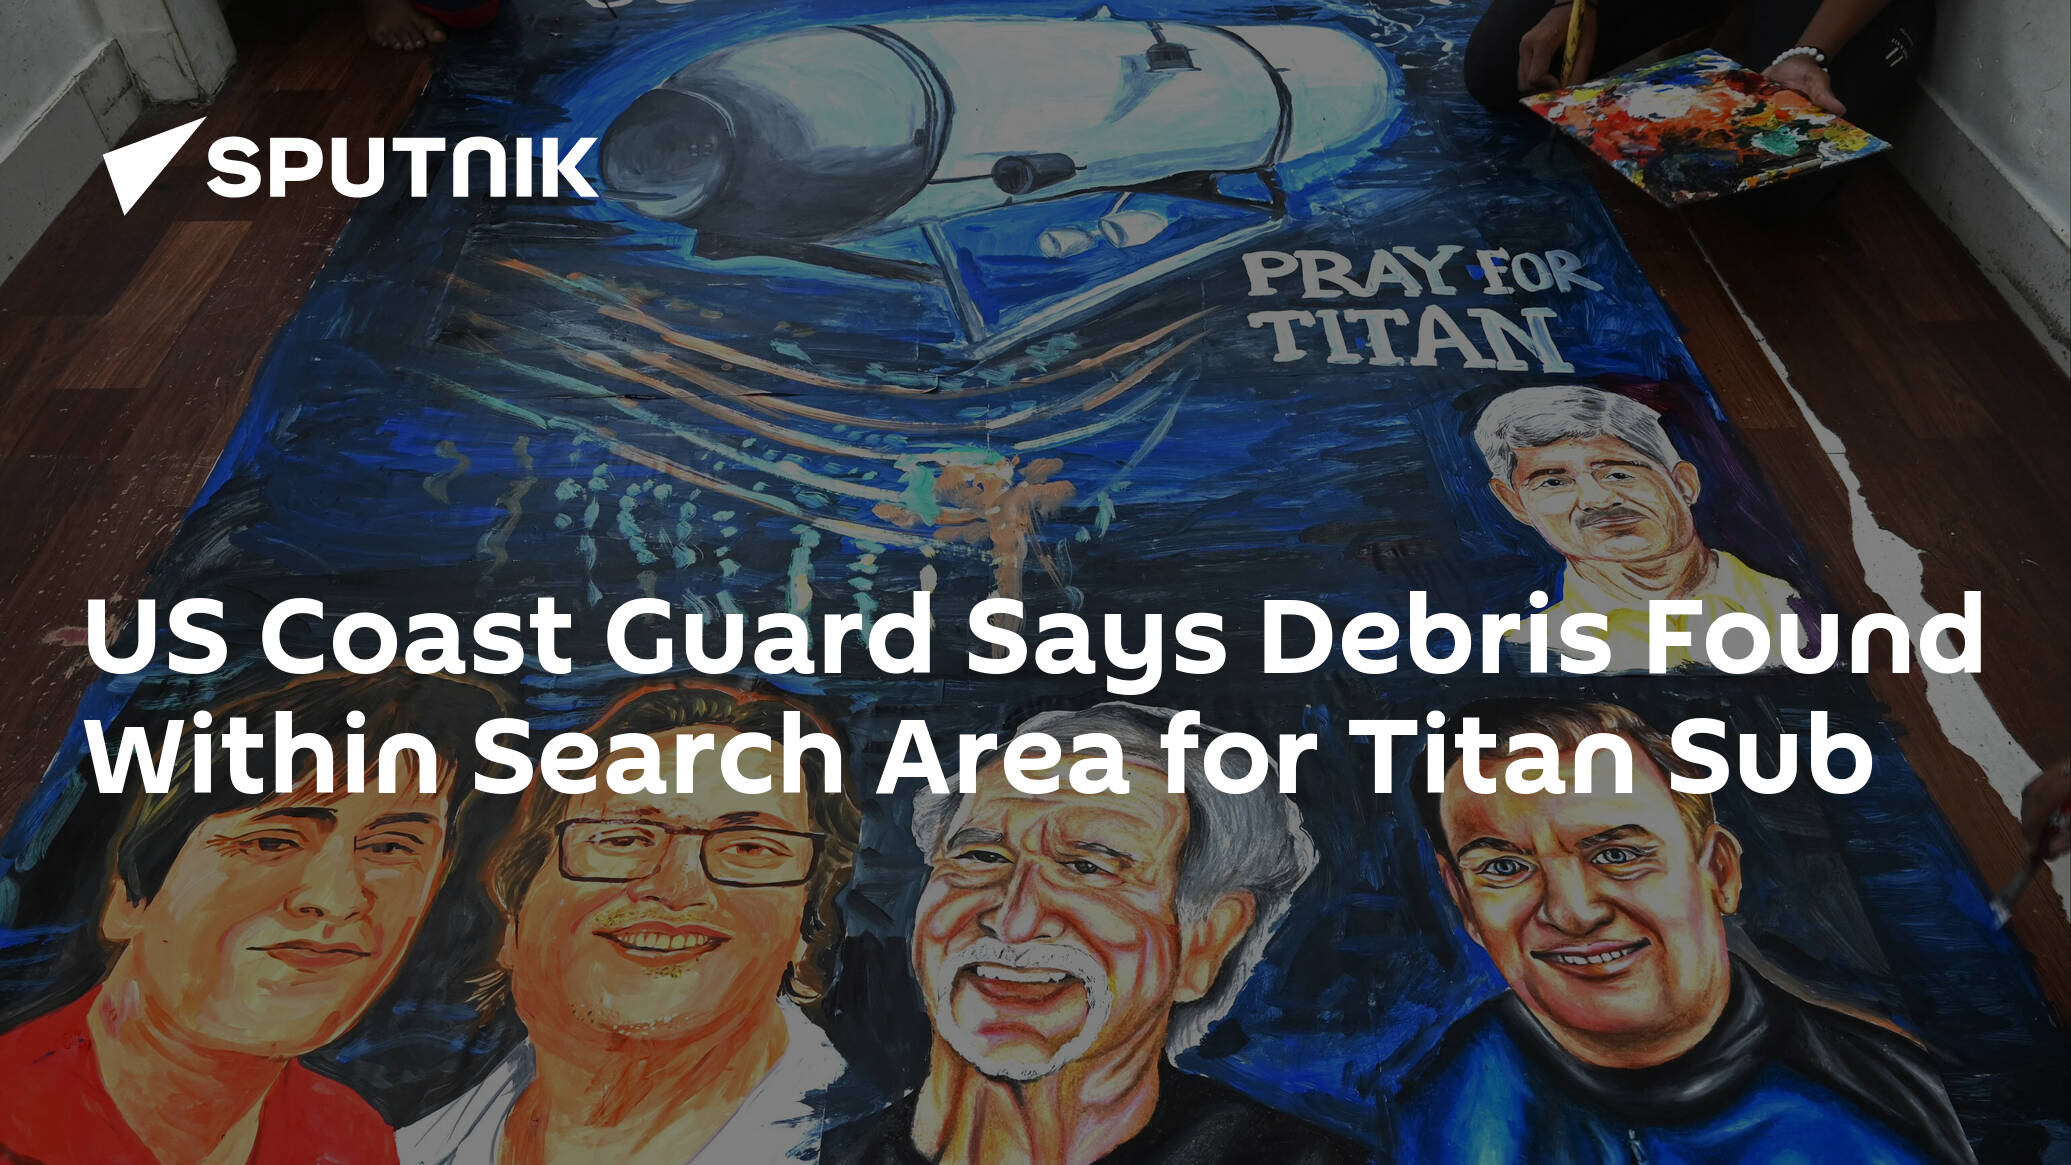 US Coast Guard Says Debris Found Within Search Area for Titan Sub, Experts Evaluating Info